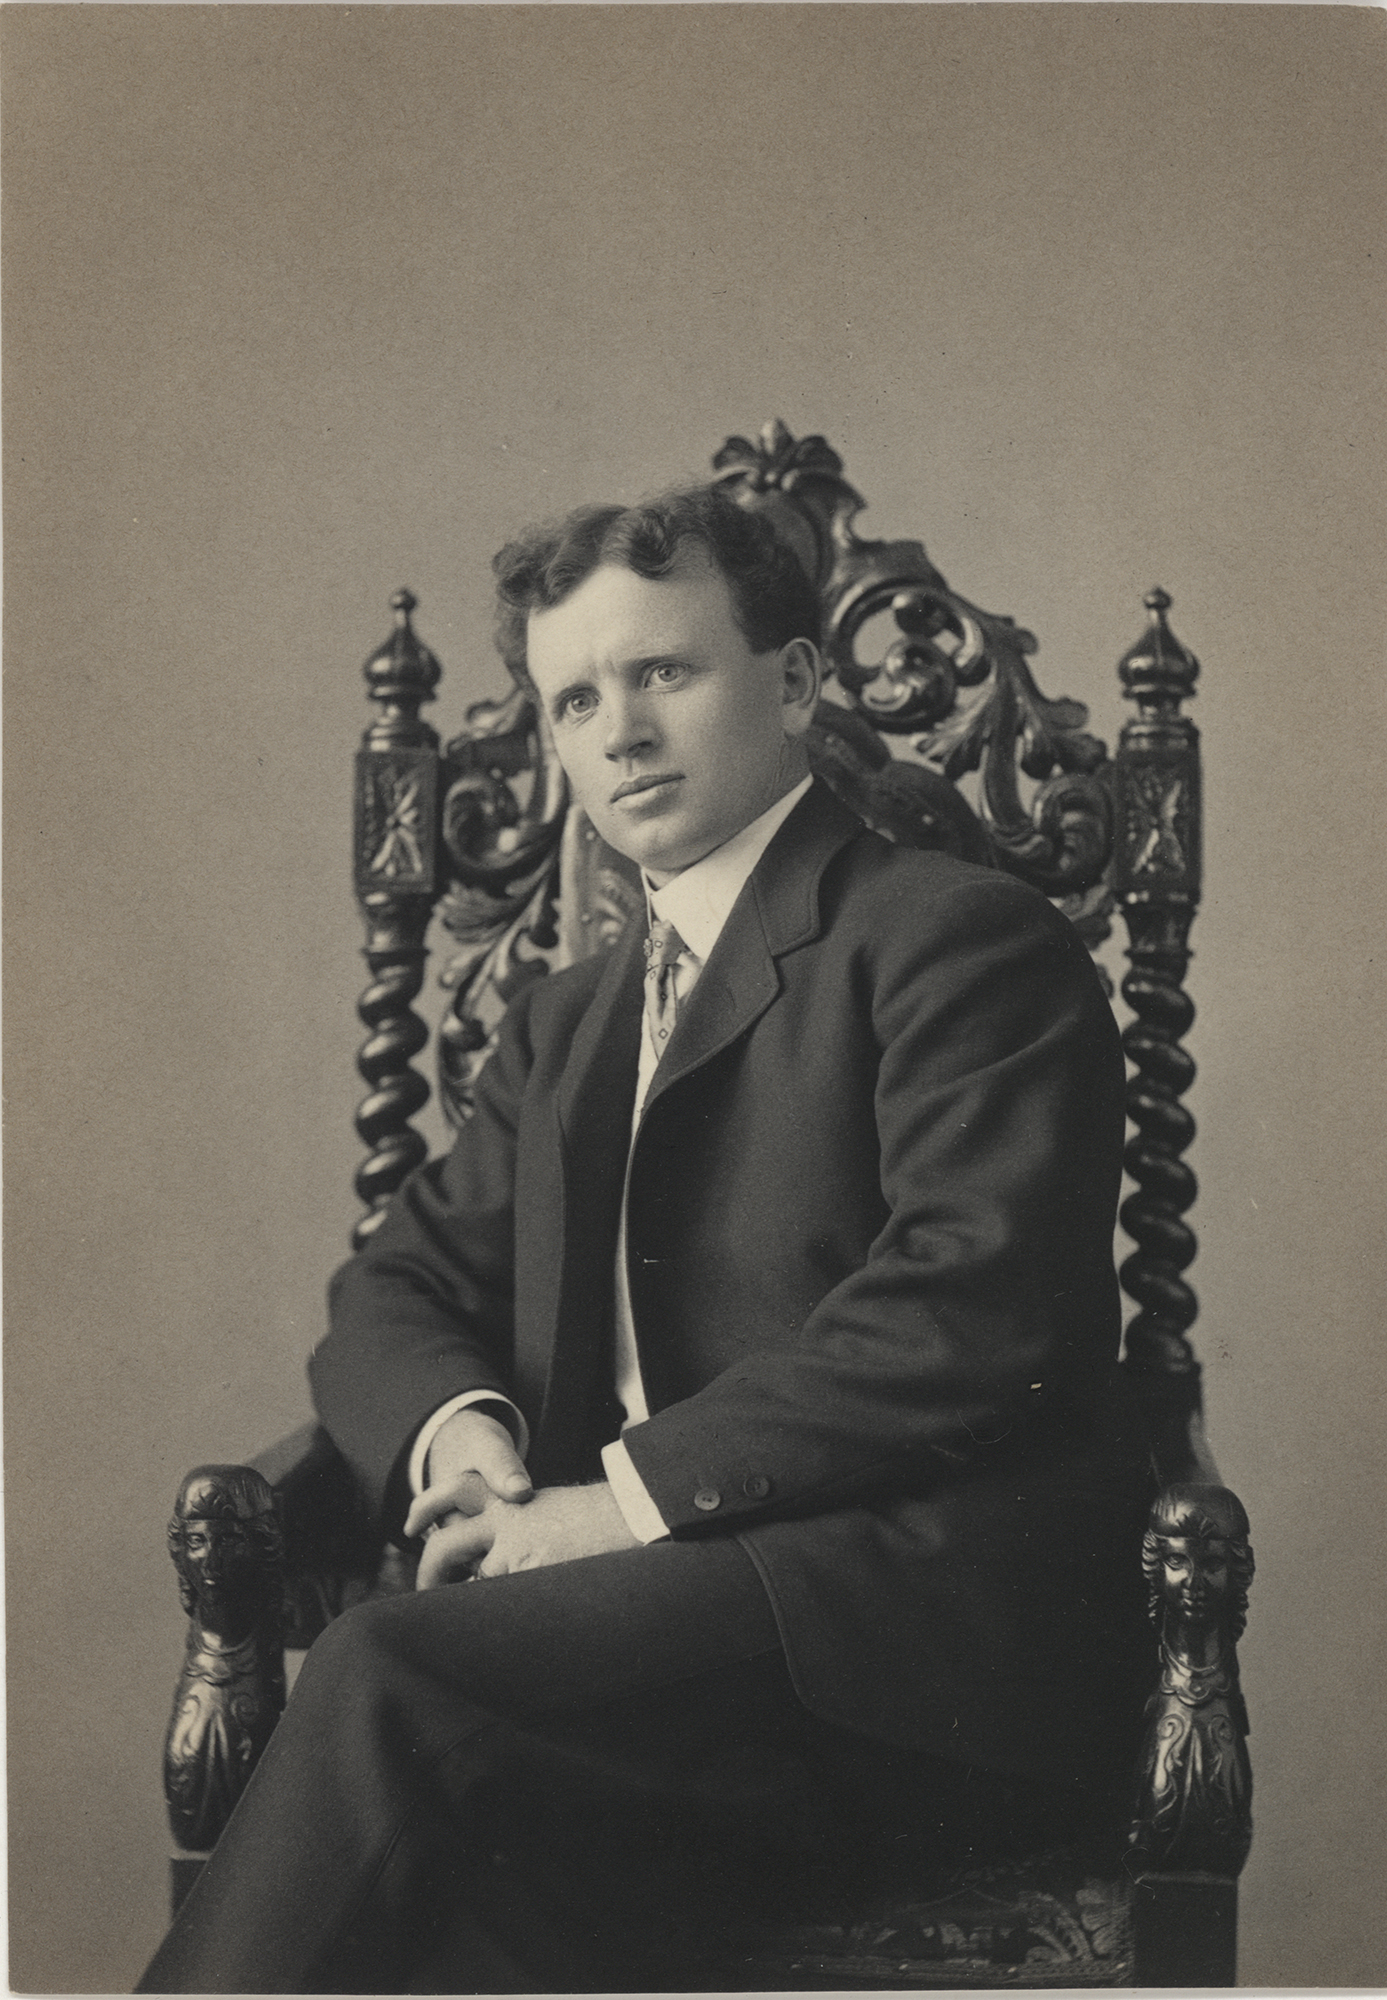 Photo of a man sitting in an ornately-carved wooden chair, posing for this portrait taken around 1900. The young man is dressed in a dark colored suit, with a white dress shirt and a necktie. He has short dark hair that has tamed curls on the top of his head. He is sitting in the chair with his left leg crossed over the right, and this hands clasped in a relaxed manner, resting his right elbow on the arm of the chair. His suit jacket is unbuttoned. The background is plain behind him.